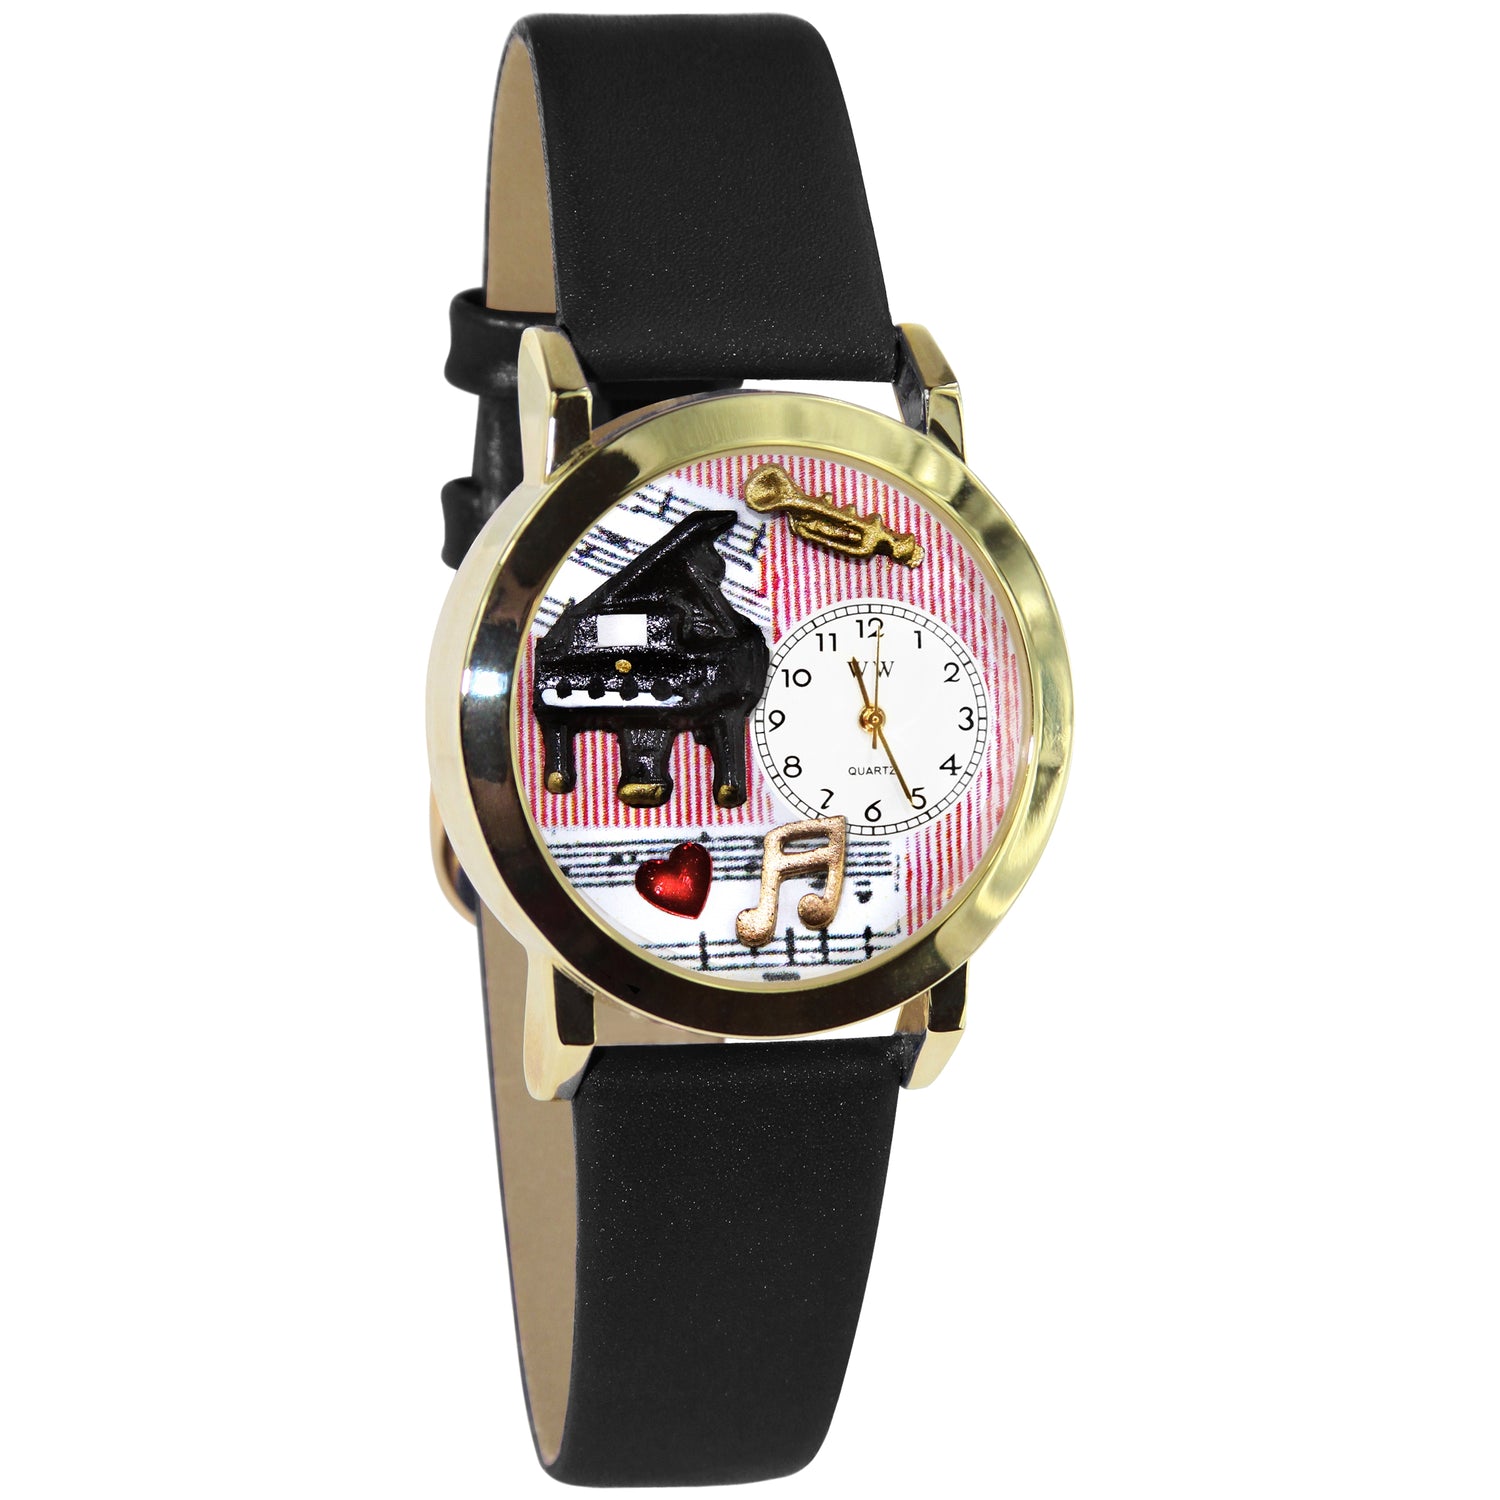 Whimsical Gifts | Music Teacher 3D Watch Small Style | Handmade in USA | Professions Themed | Teacher | Novelty Unique Fun Miniatures Gift | Gold Finish Black Leather Watch Band